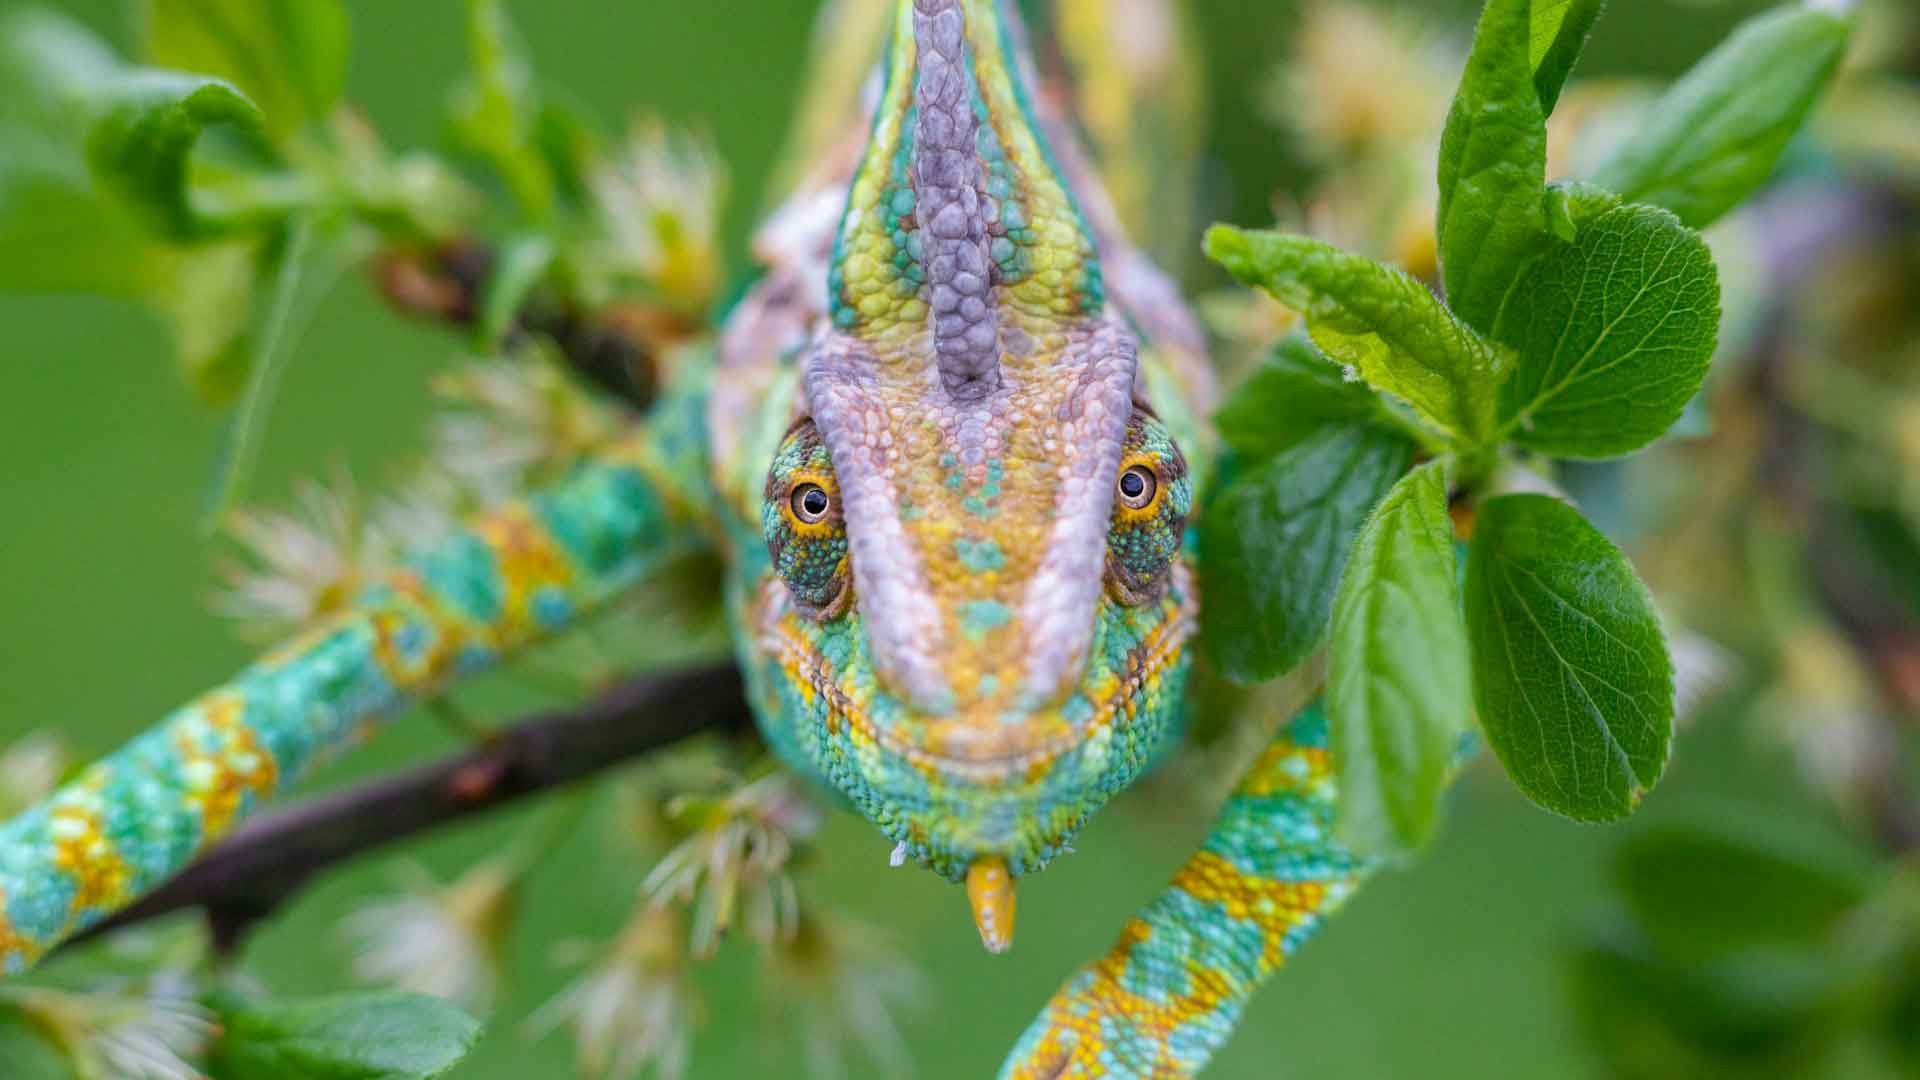 A chameleon adapting for success!